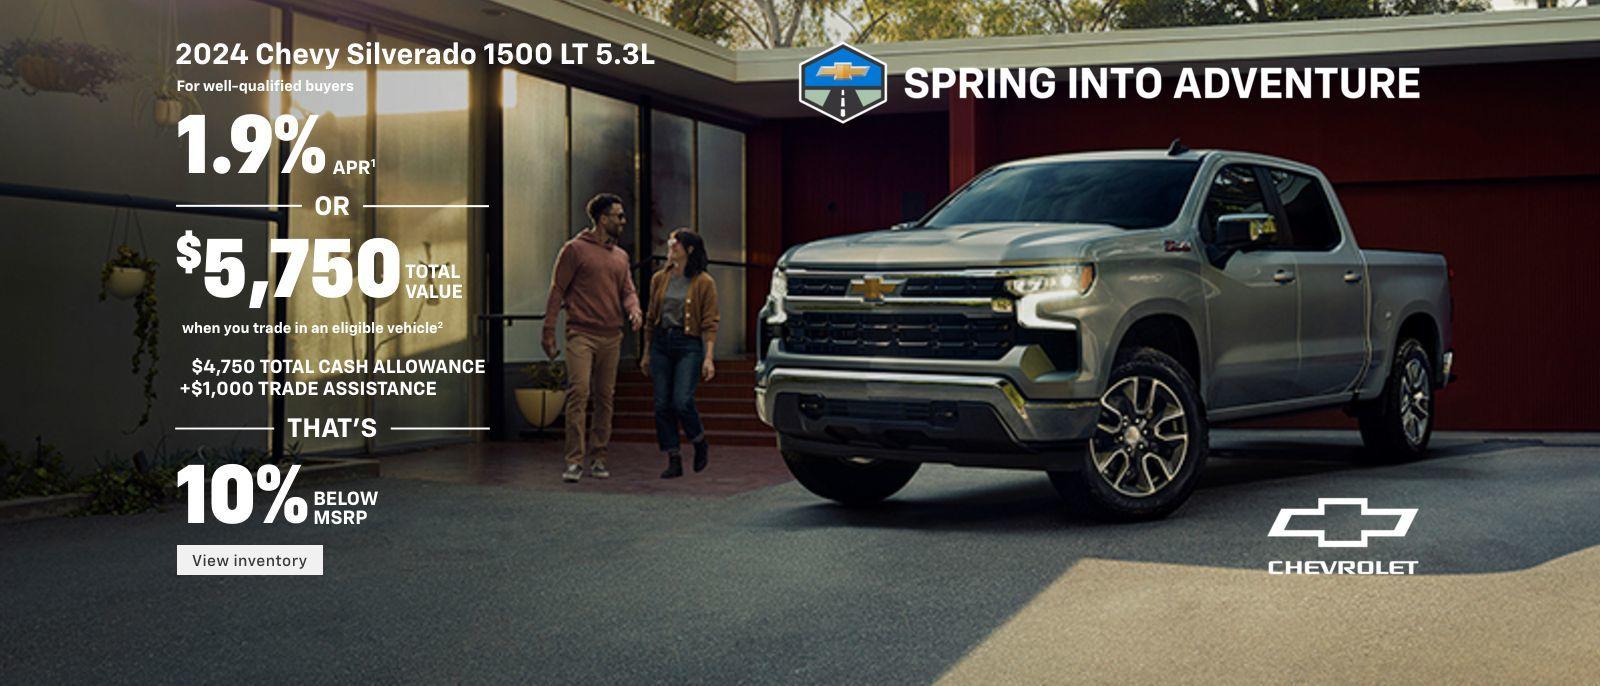 2024 Chevy Silverado 1500 LT 5.3L. For well-qualified buyers 1.9% APR. Or, $5,750 total value when you trade in an eligible vehicle. $4,750 total cash allowance + $1,000 trade assistance. That's, 10% below MSRP.